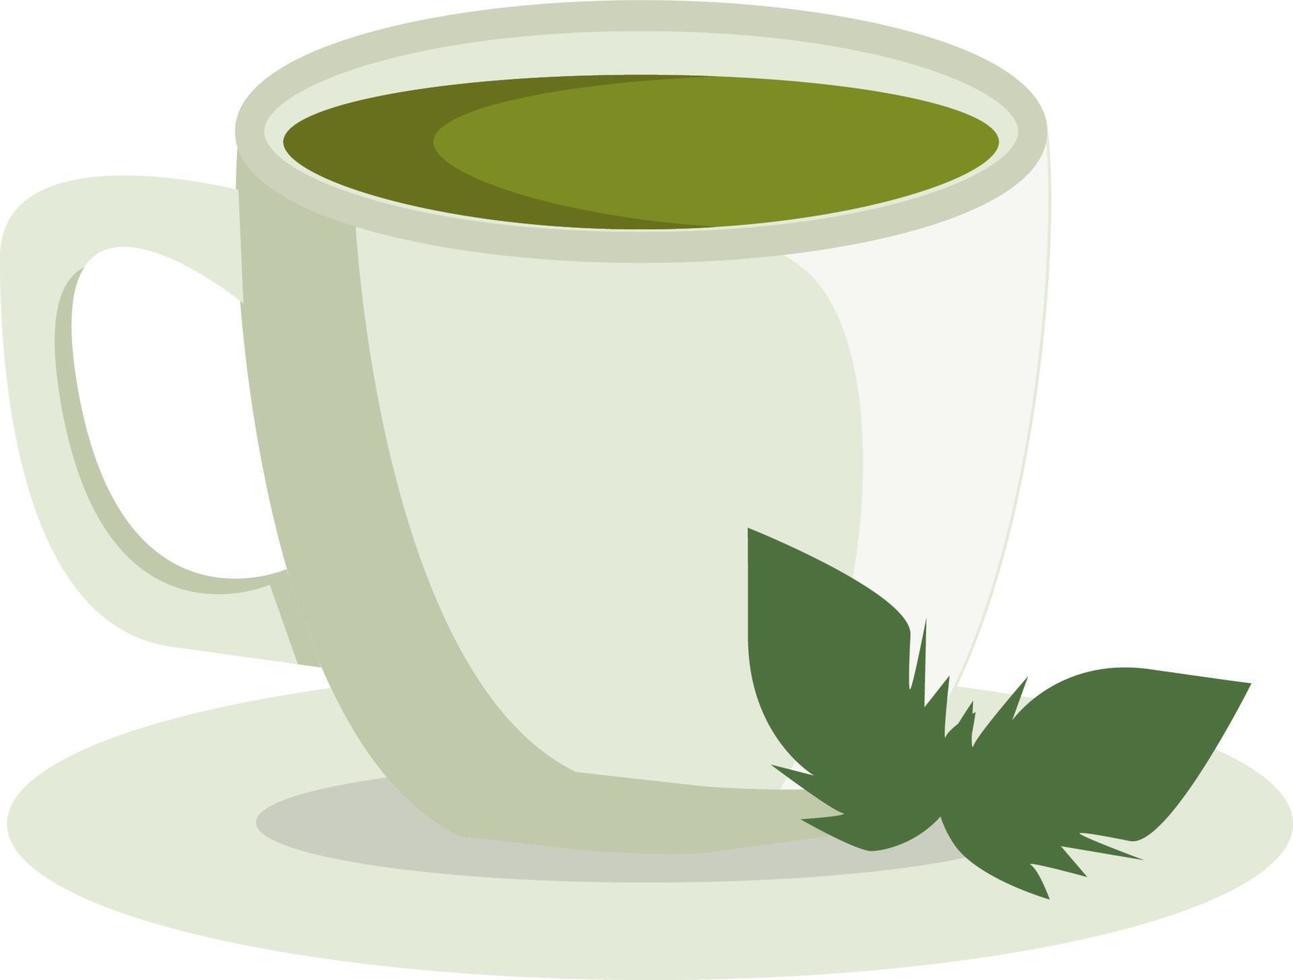 A cup of green tea, vector or color illustration.